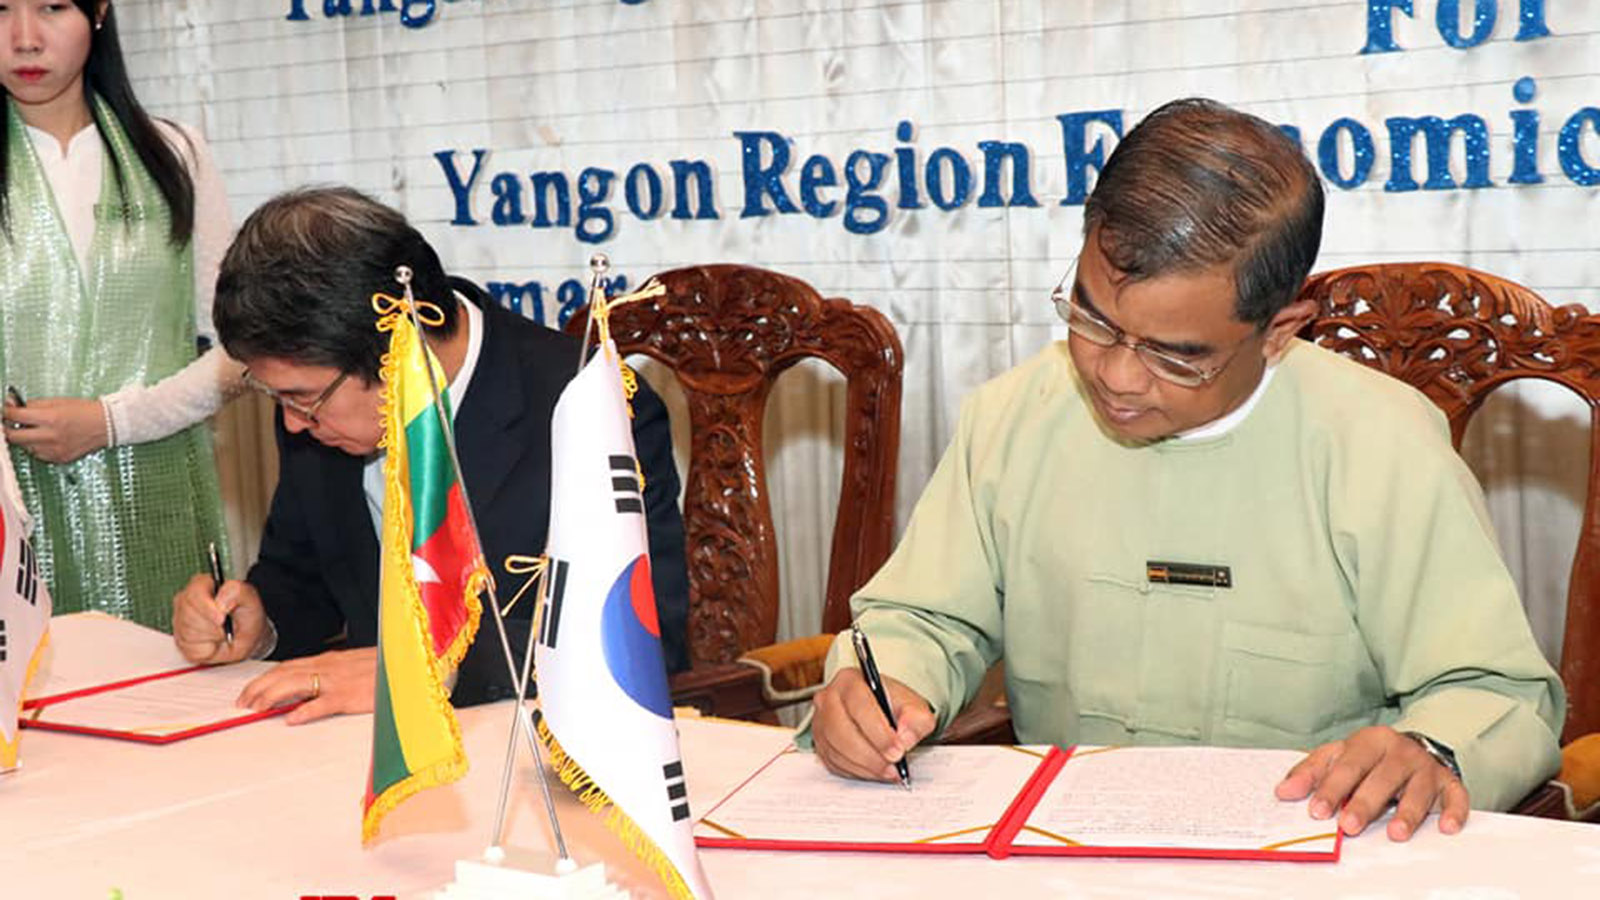 Yangon Regional Government and South Korea based company, Myanmar Wooree Company signed a MOU for Yangon Region Economic Development project to improve businesses in the commercial city of Yangon